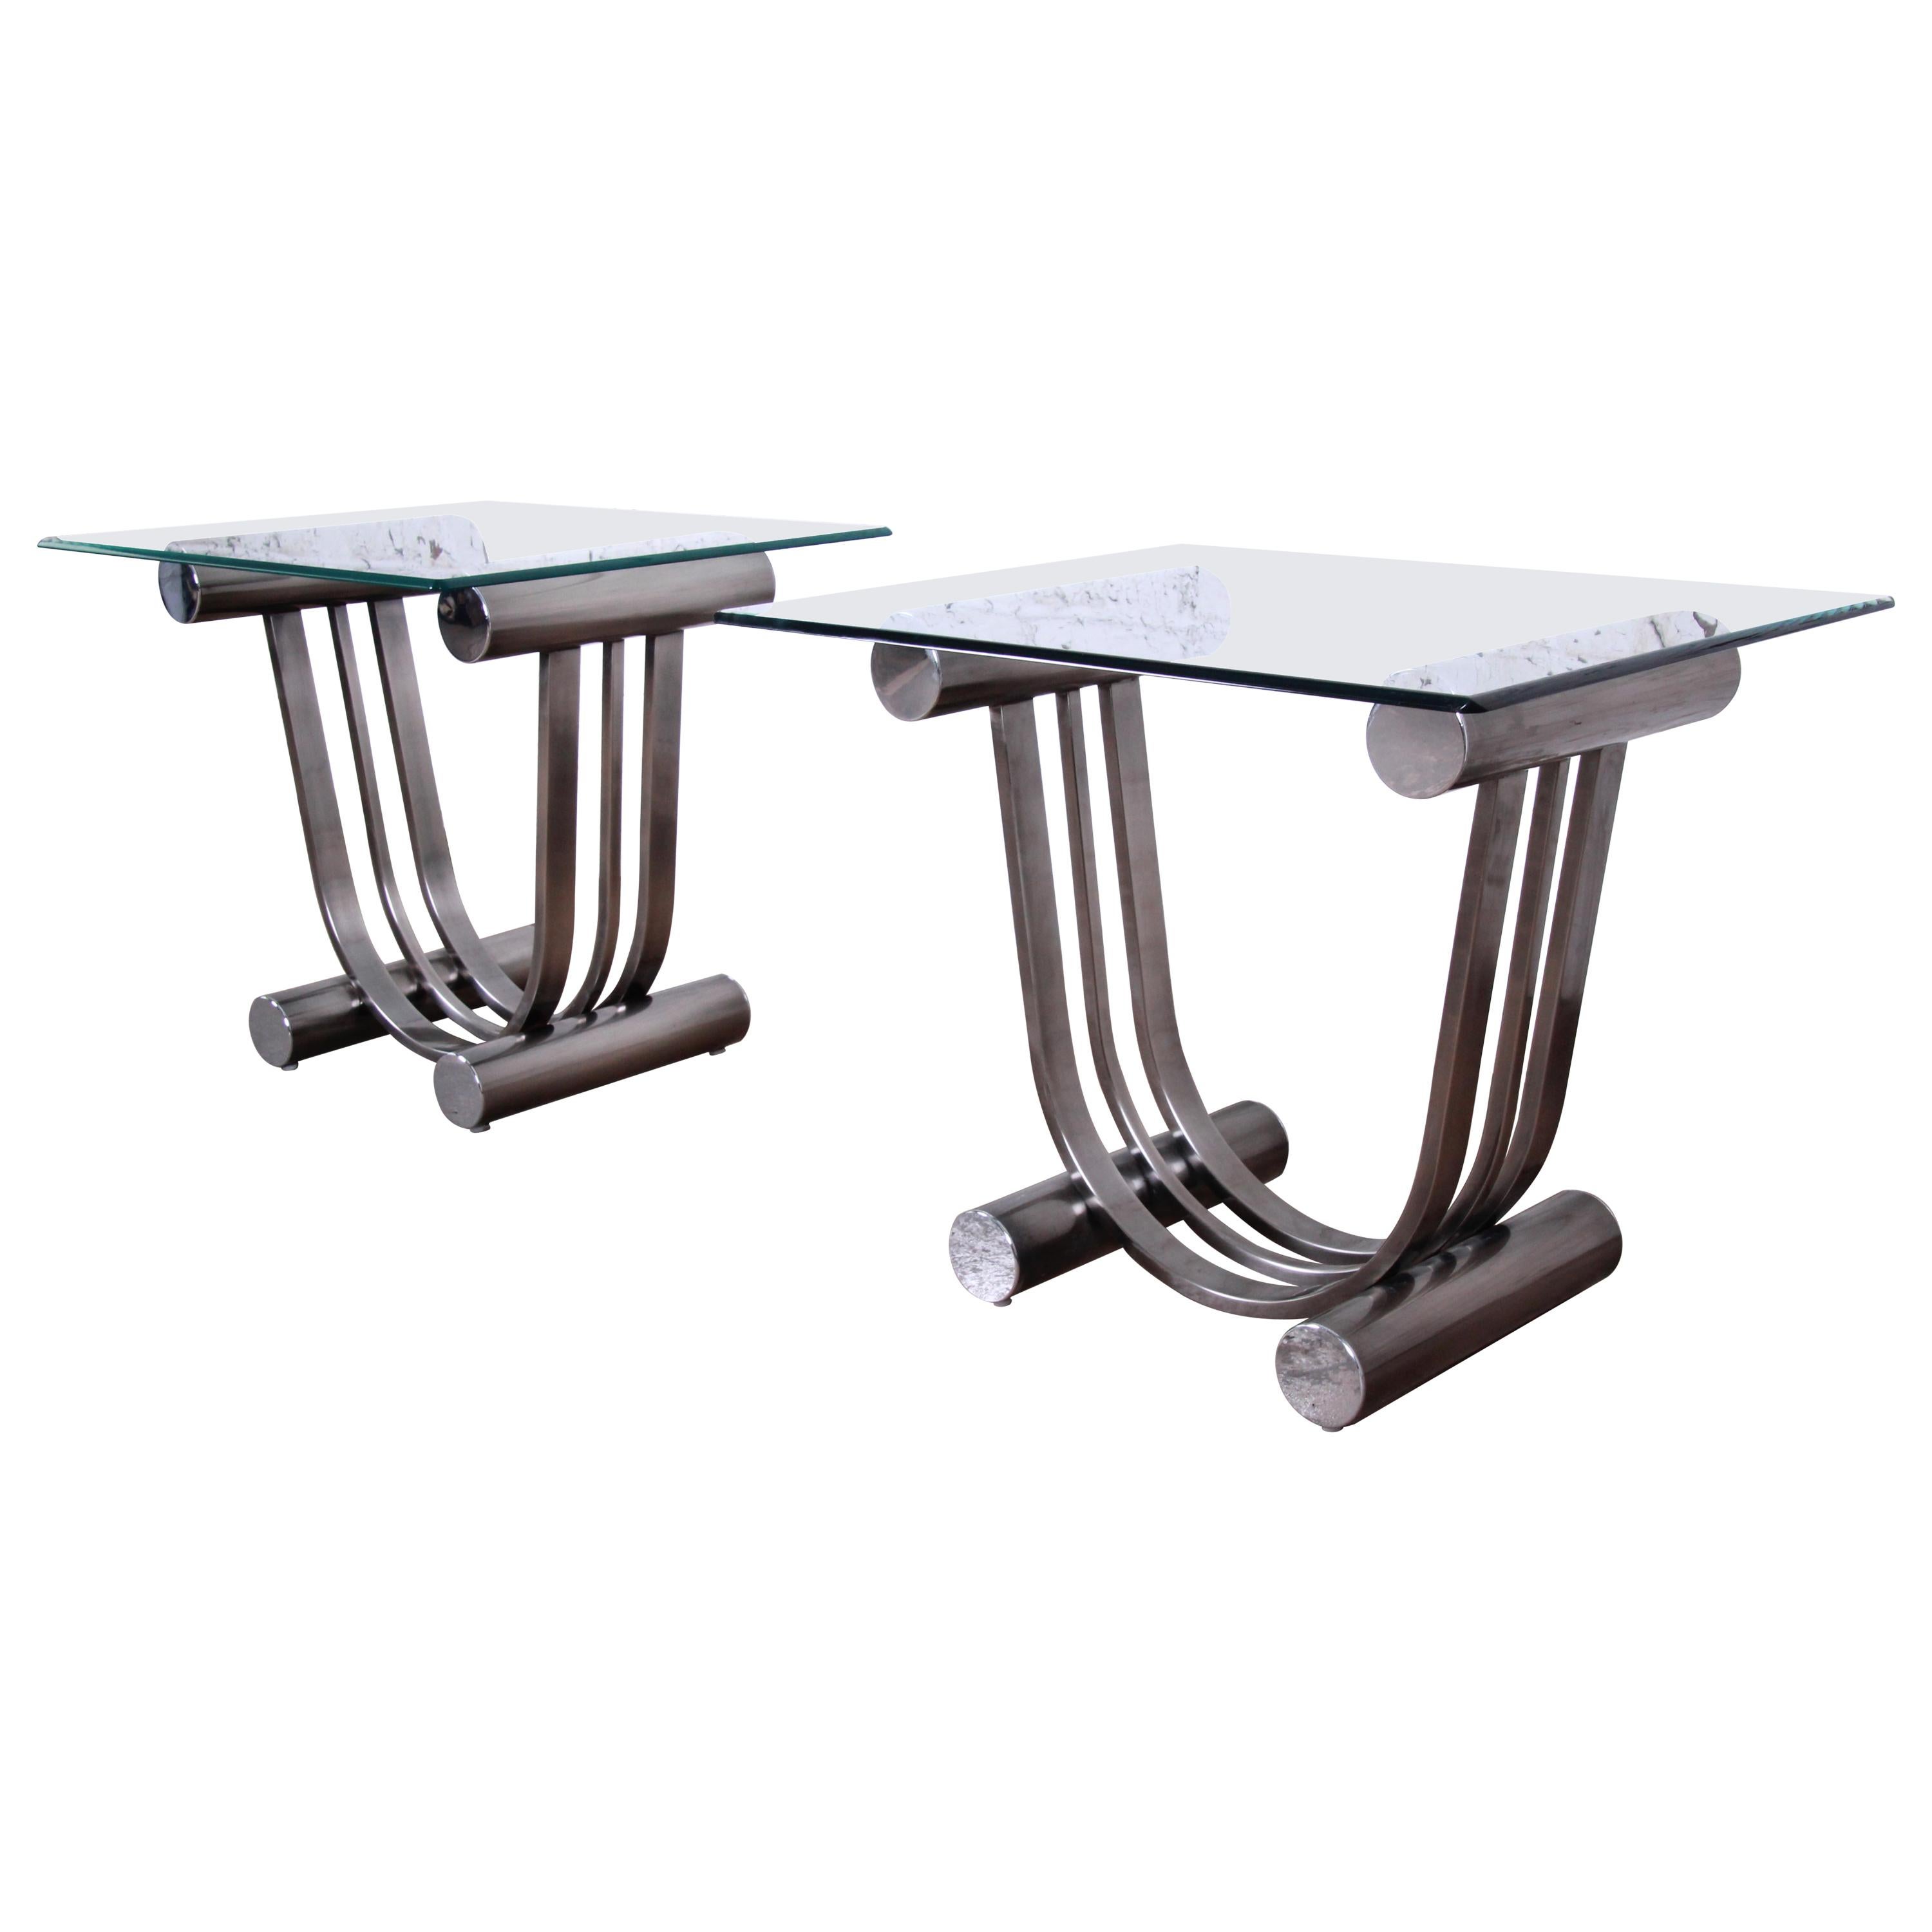 Design Institute America Art Deco Style Chrome and Glass Side Table, Pair